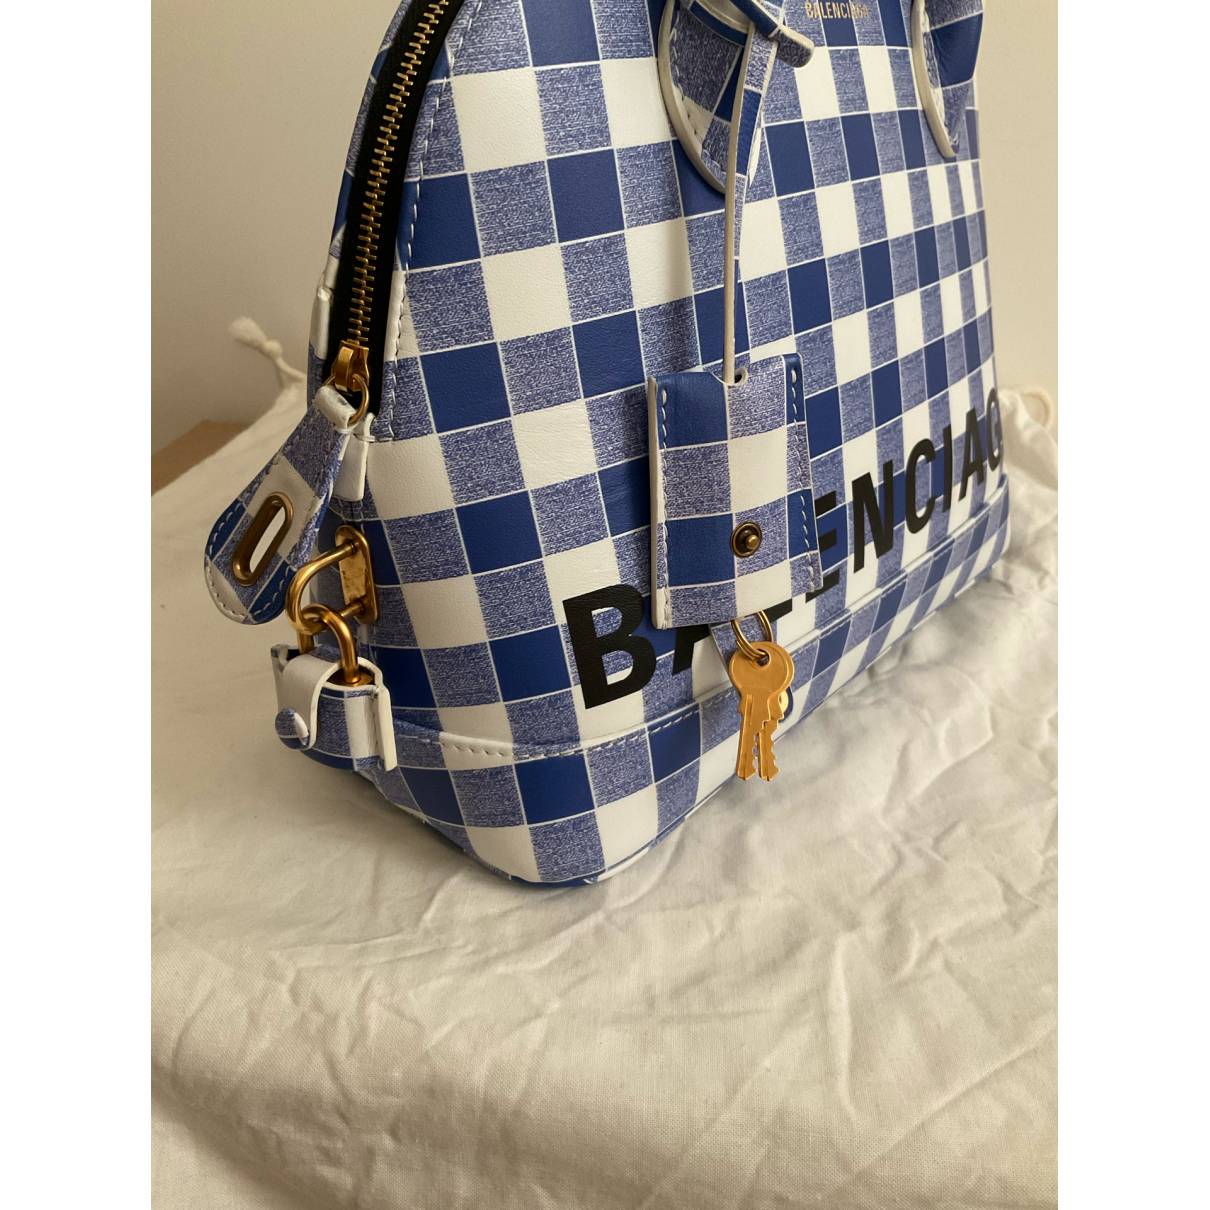 Balenciaga - Authenticated Ville Top Handle Handbag - Leather Blue Gingham for Women, Very Good Condition